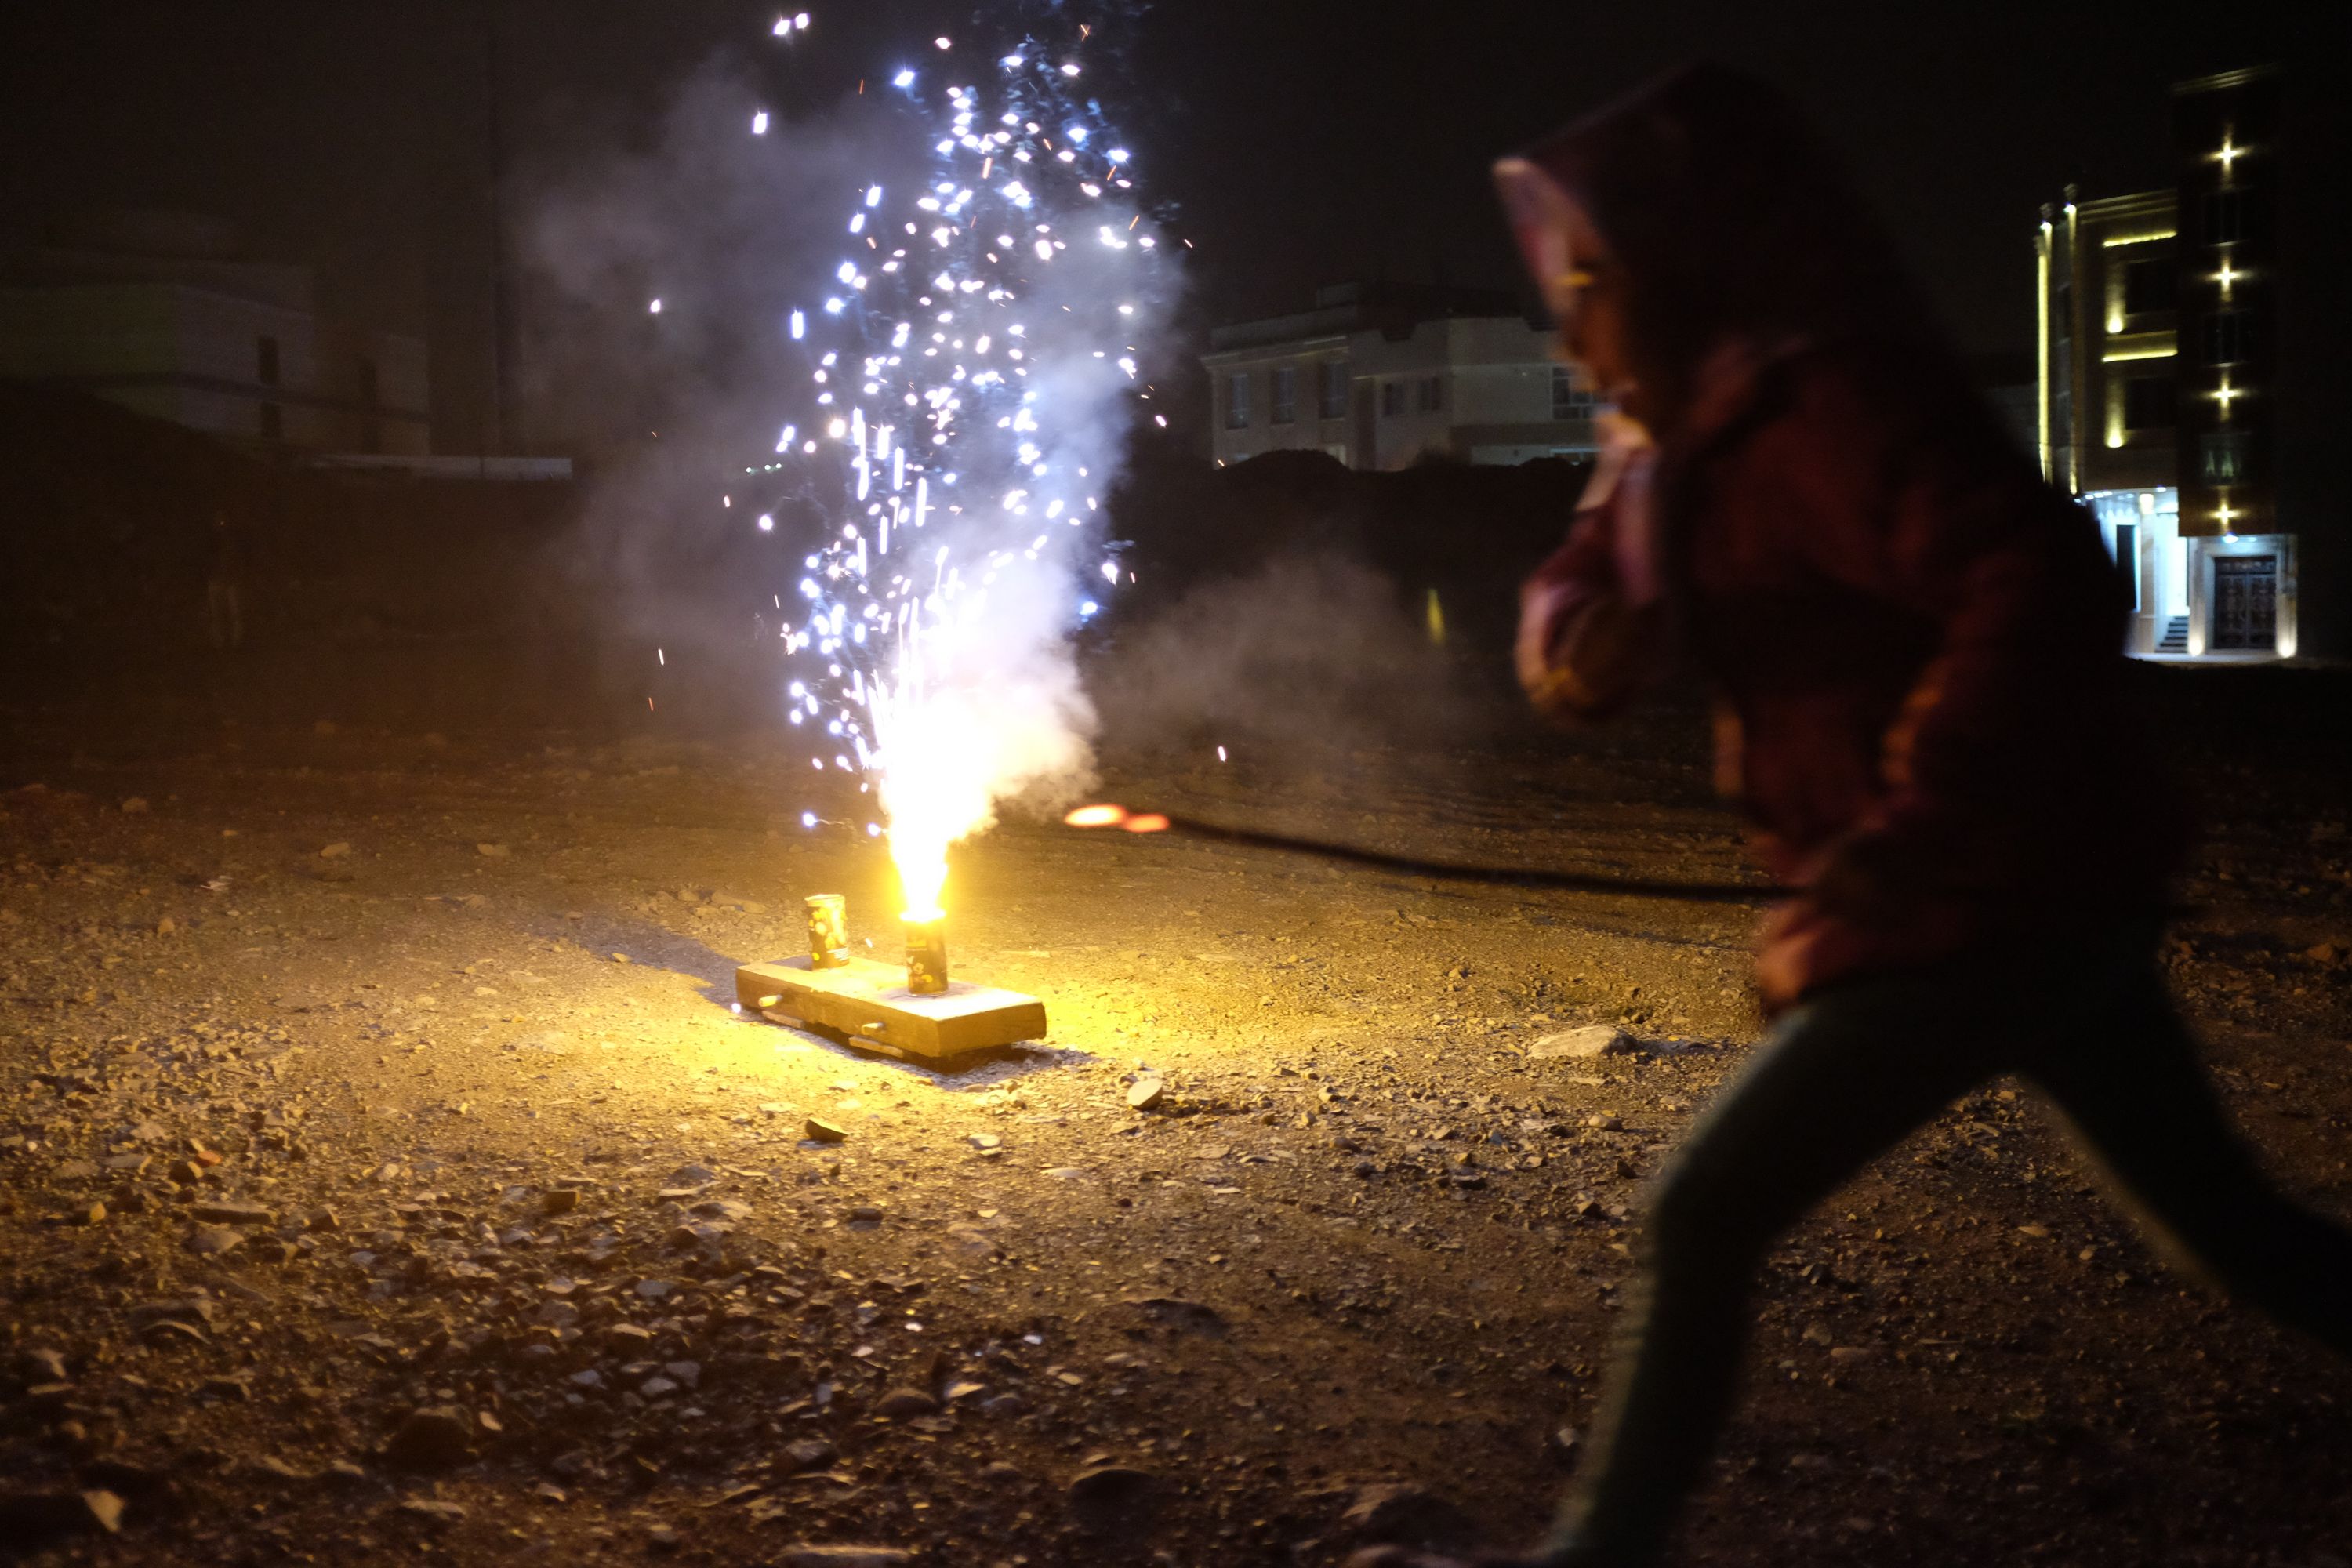 A small girl runs past a large sparkler placed on the ground, on a street at night.